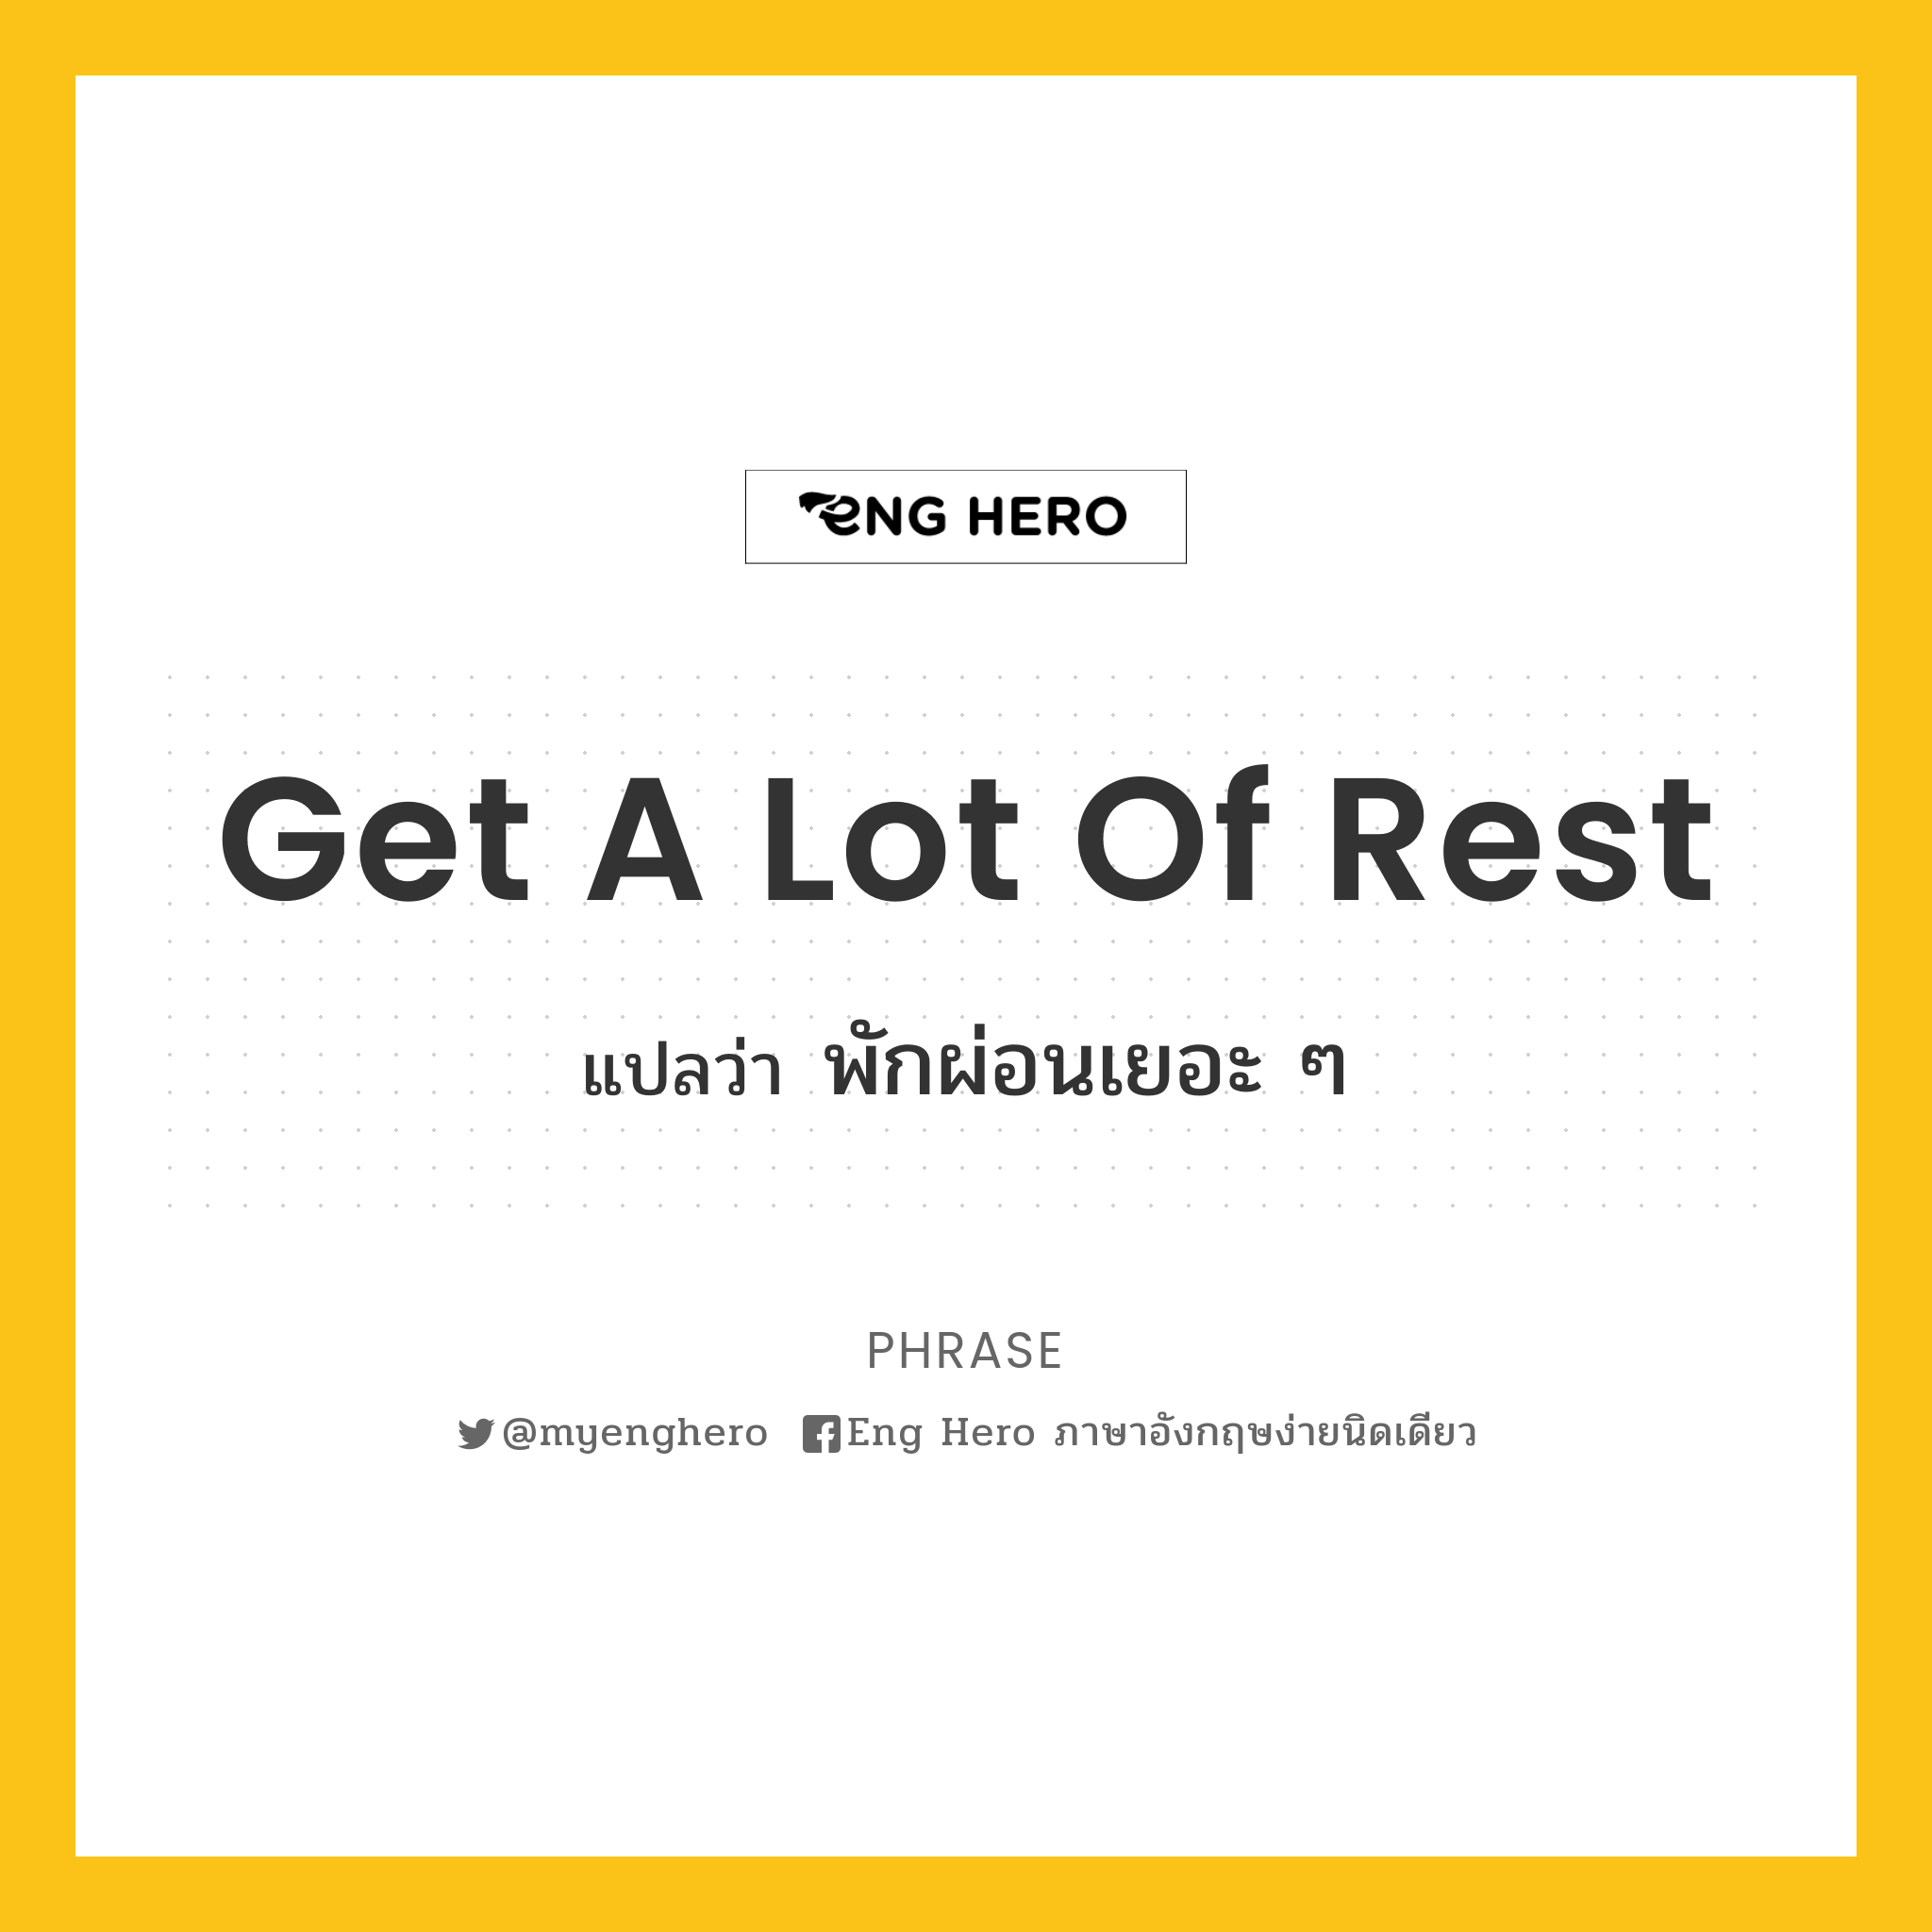 Get a lot of rest